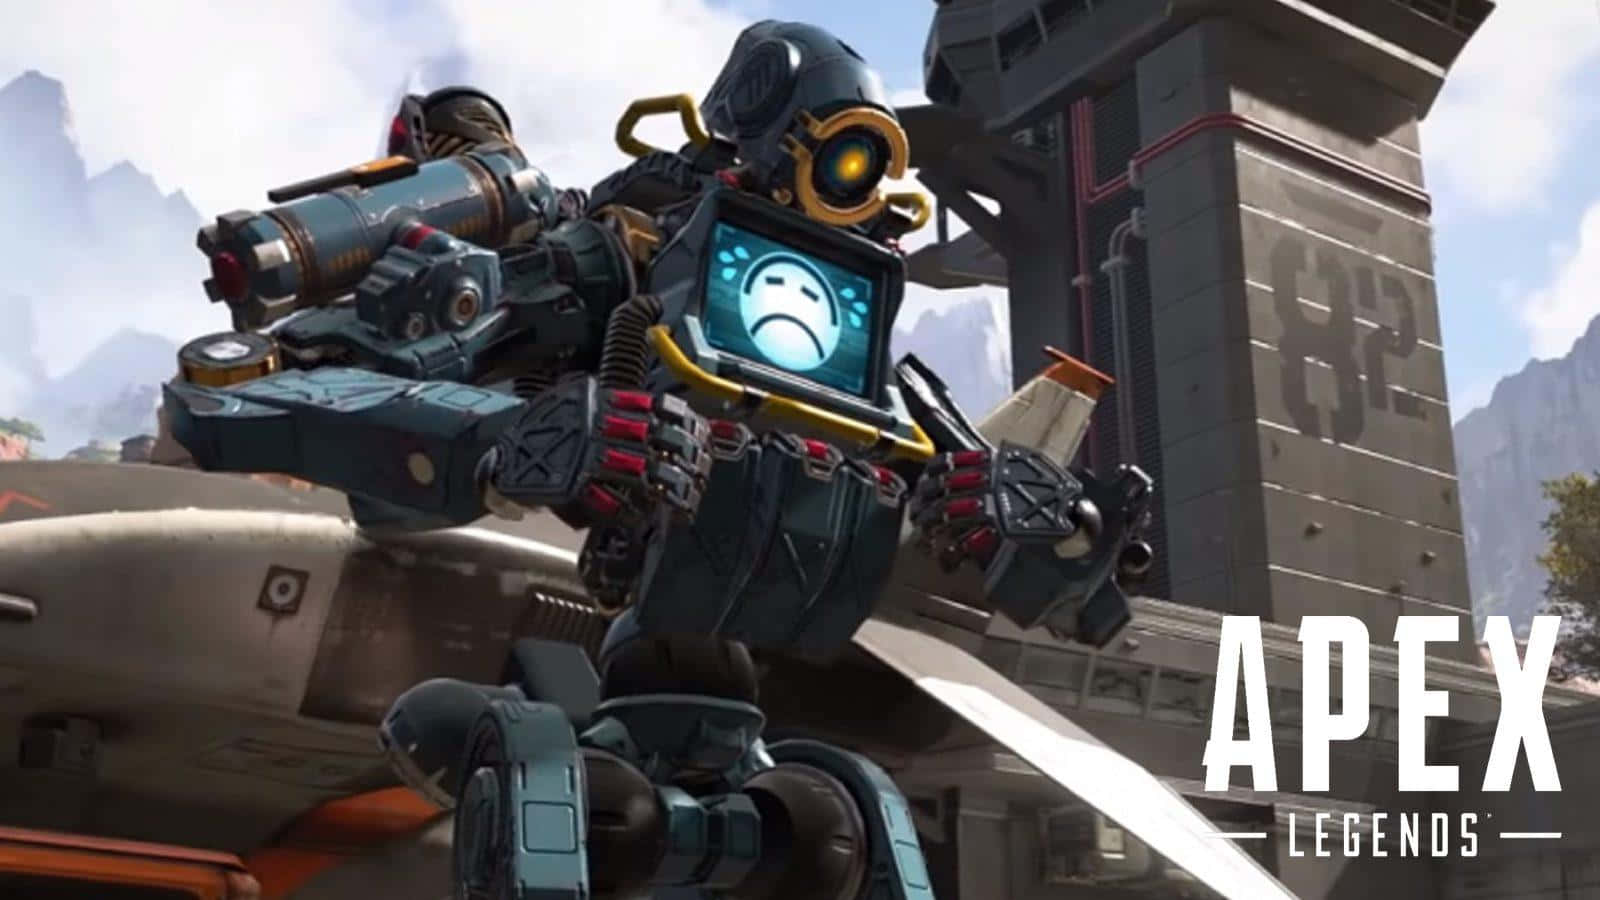 Pathfinder from Apex Legends Ready for Adventure Wallpaper